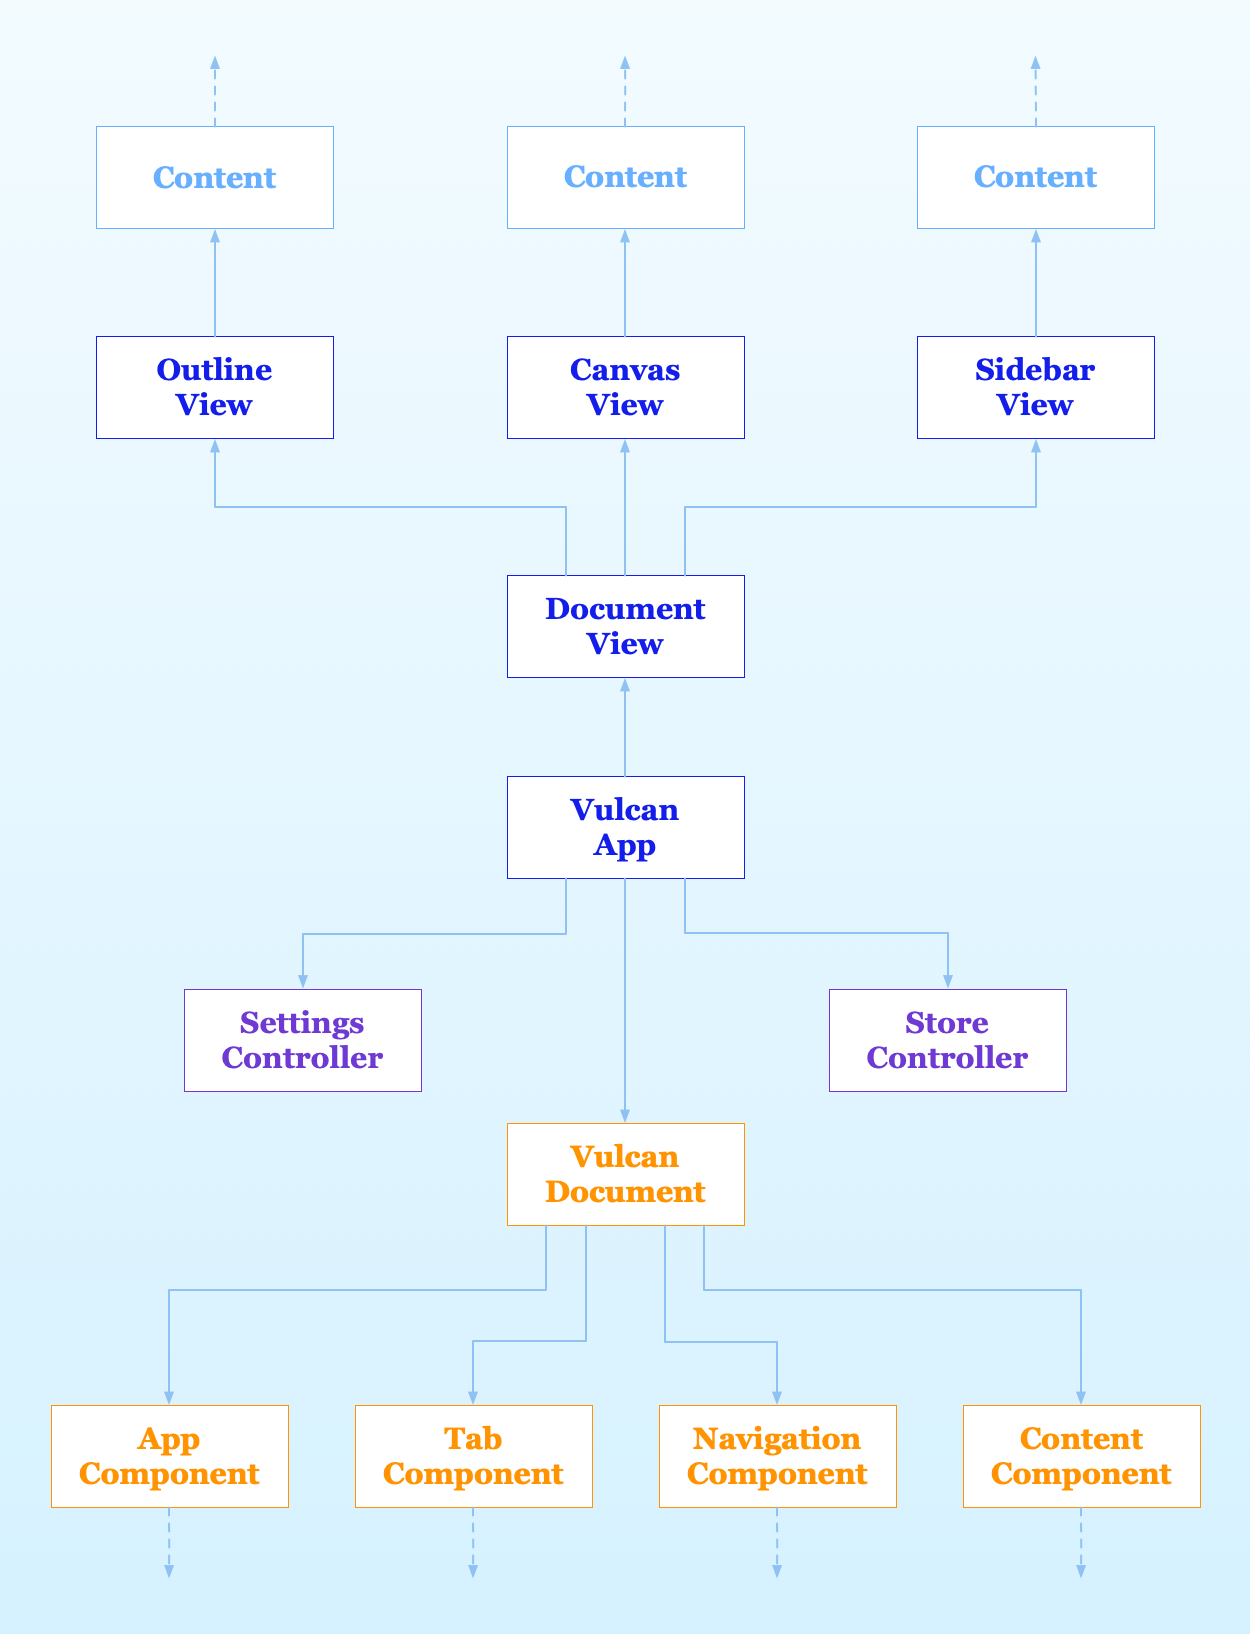 The Vulcan app structure following the MVC and MVVM patterns